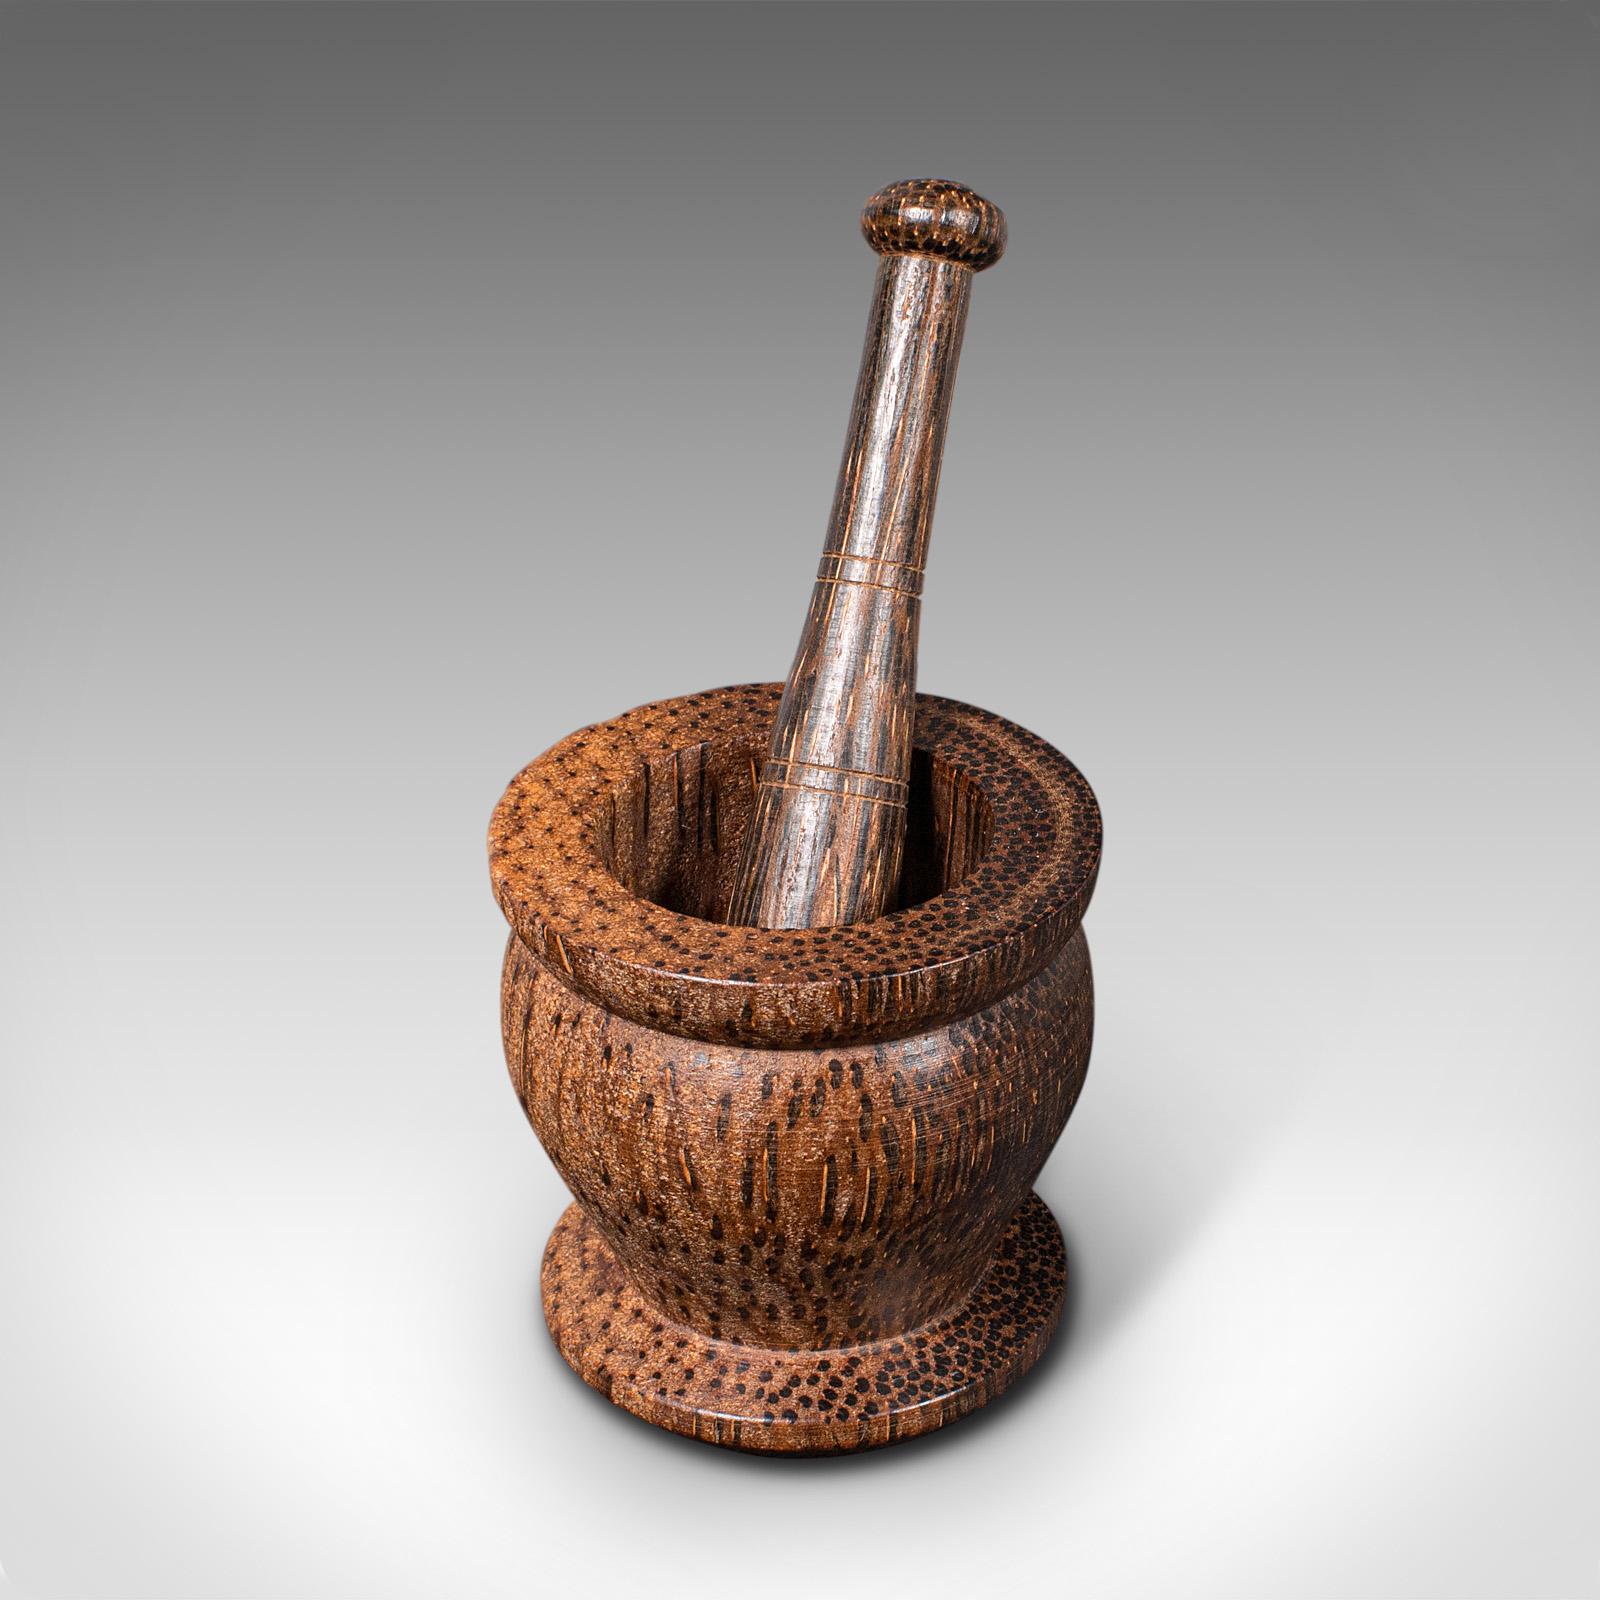 This is a small vintage mortar and pestle. An English, Black Palmyra decorative treen or apothecary set, dating to the mid 20th century, circa 1960.

Diminutive and delightful, ideal for display or use
Displaying a desirable aged patina and in